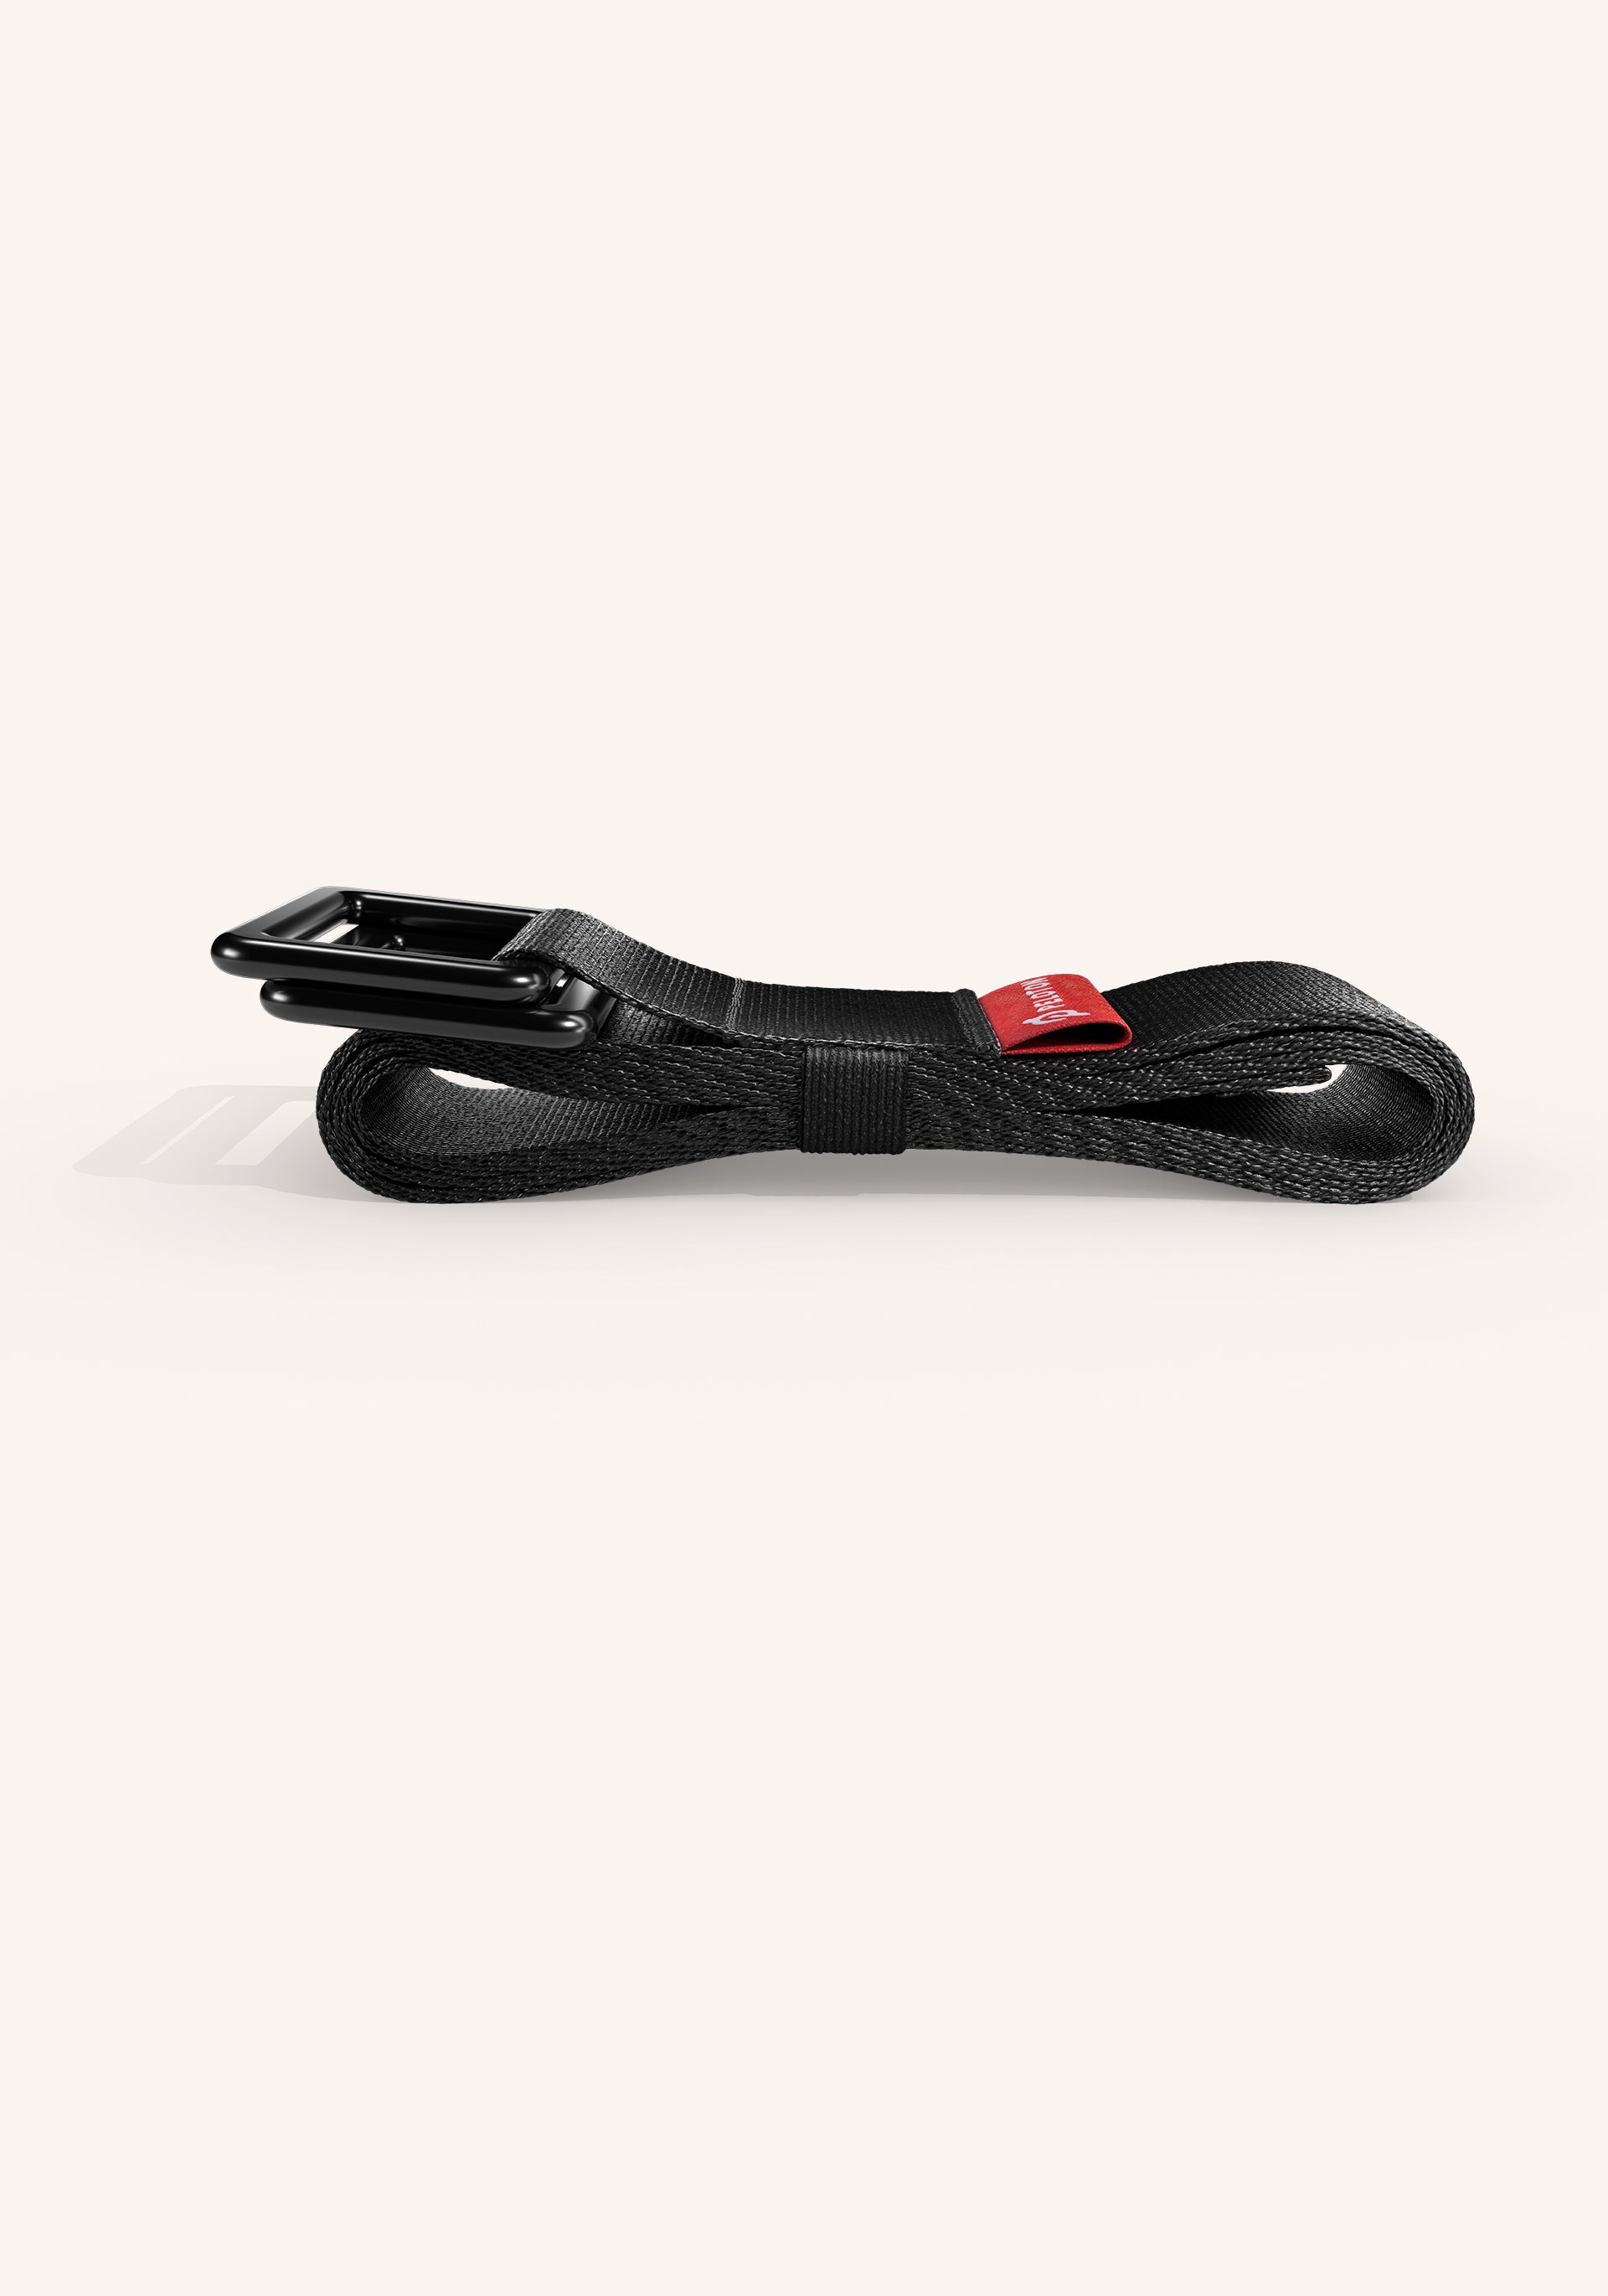 Peloton Yoga Strap  6 ft. Adjustable and Durable Nylon Strap with